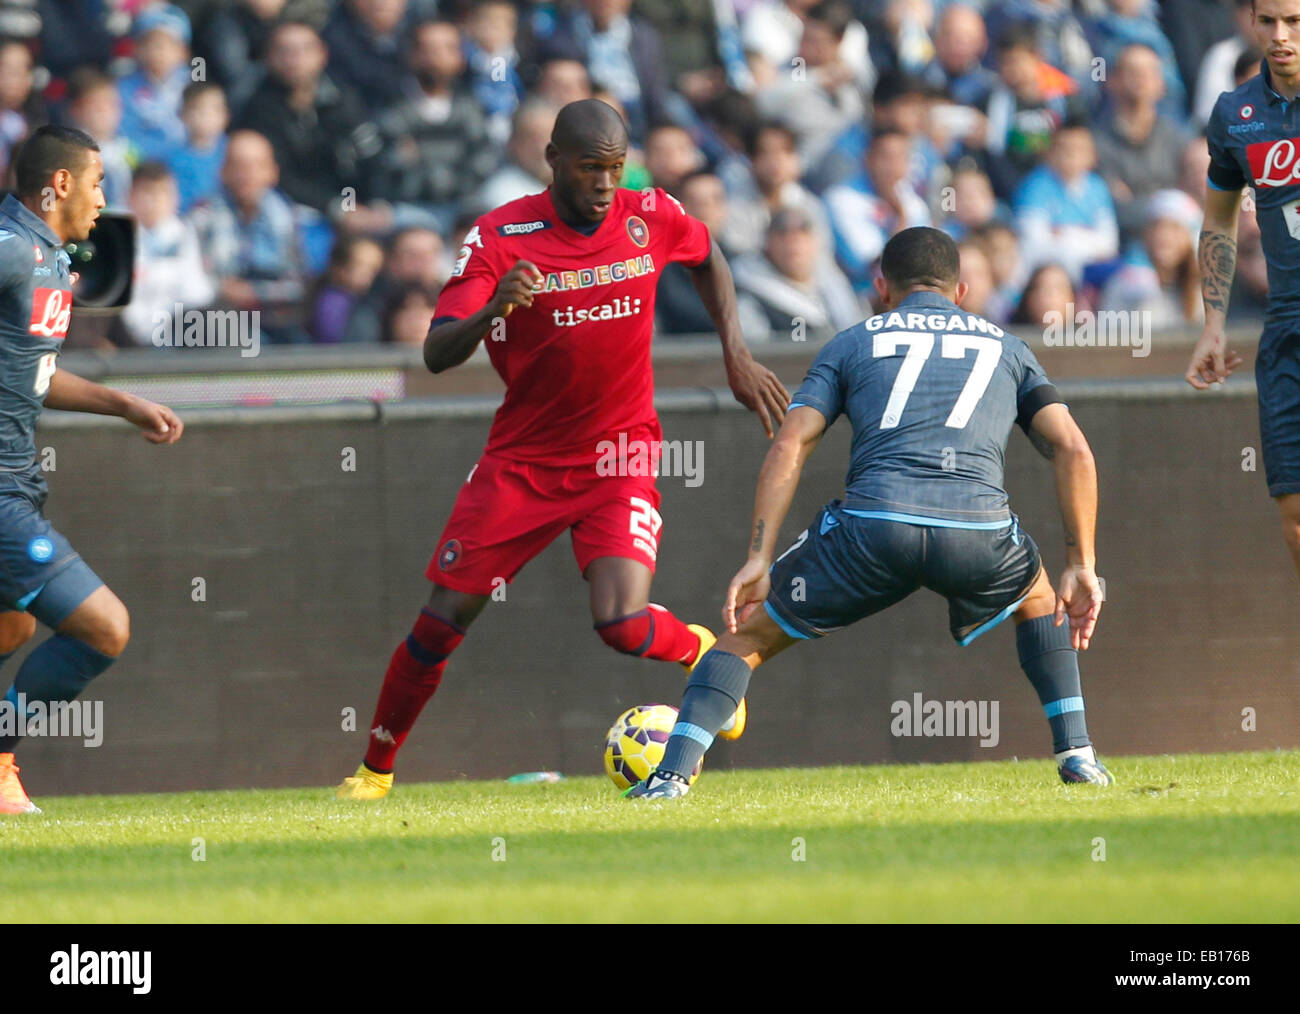 Victor Ibarbo in action during the Italian Serie A soccer match between SSC Napoli and Cagliari at San Paolo stadium in Naples. © Ciro De Luca/Pacific Press/Alamy Live News Stock Photo